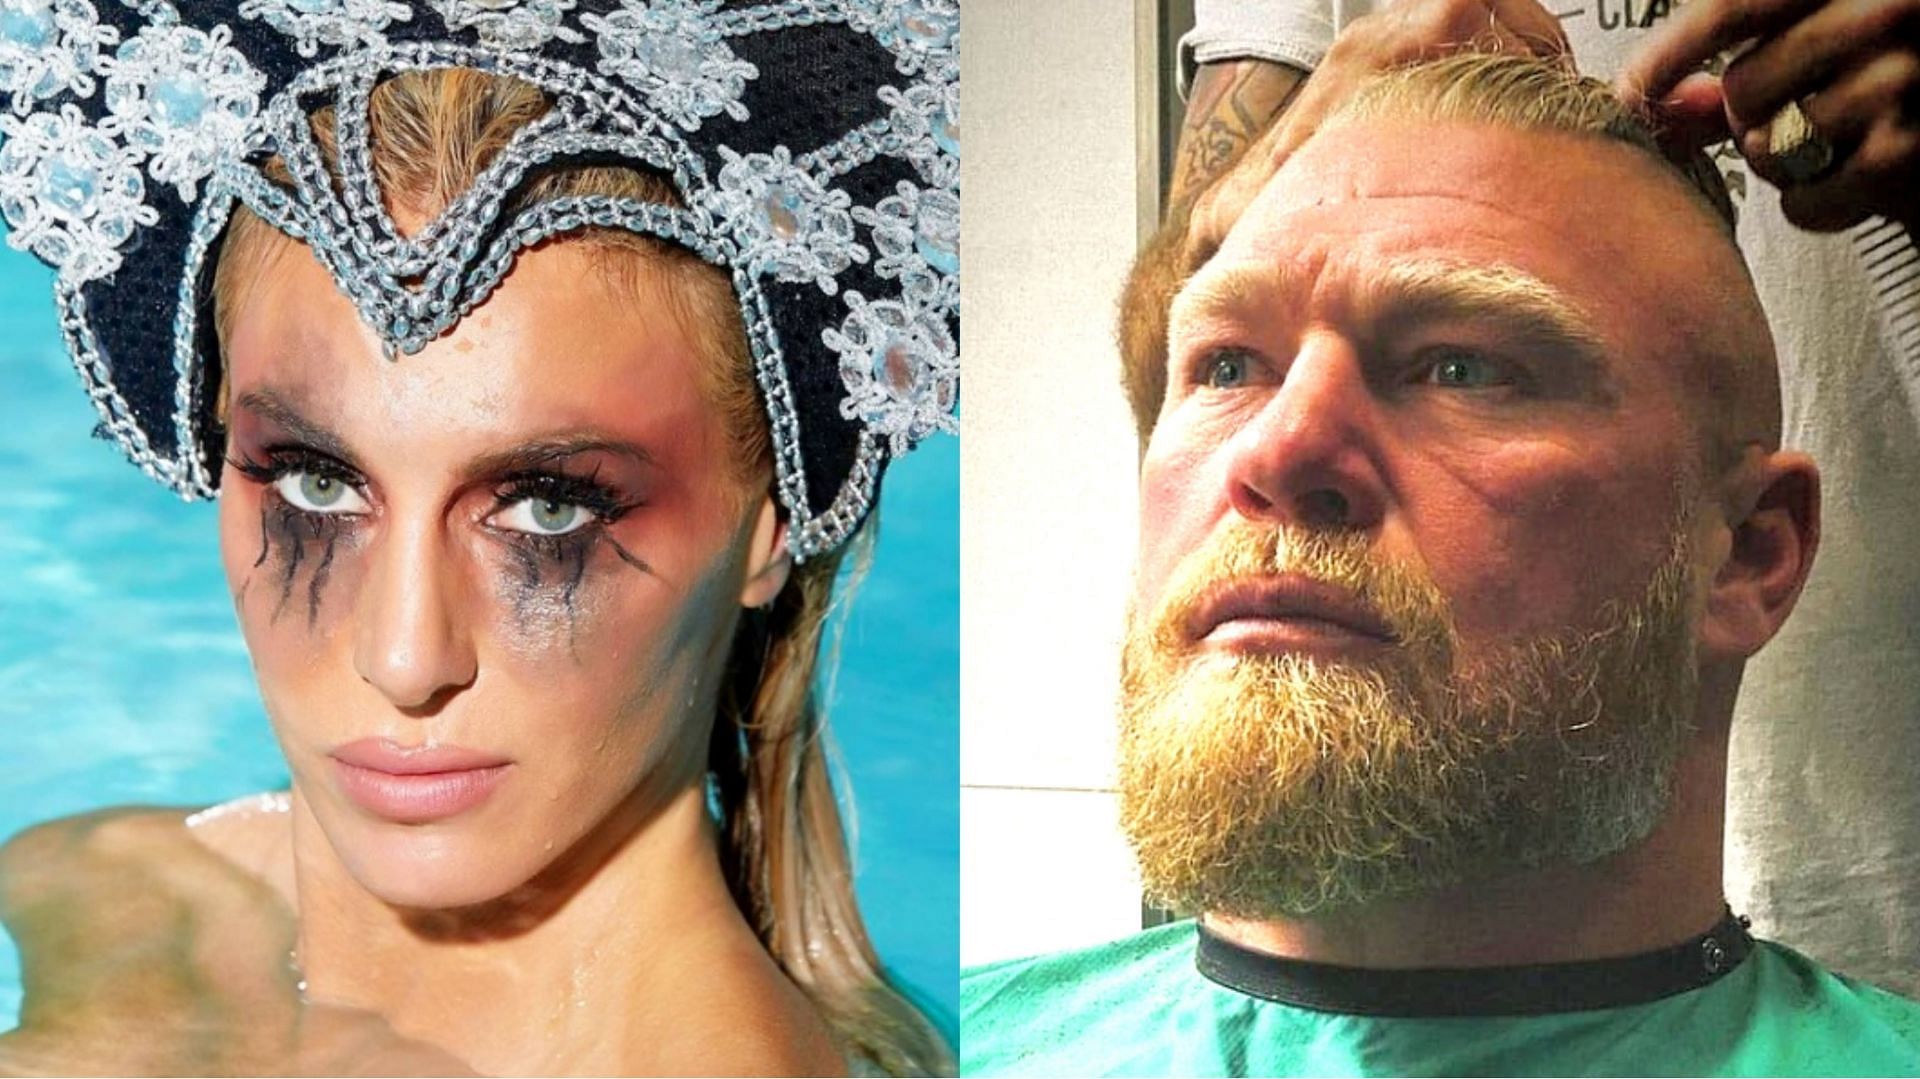 Top WWE Superstars Charlotte Flair (left) and Brock Lesnar (right)